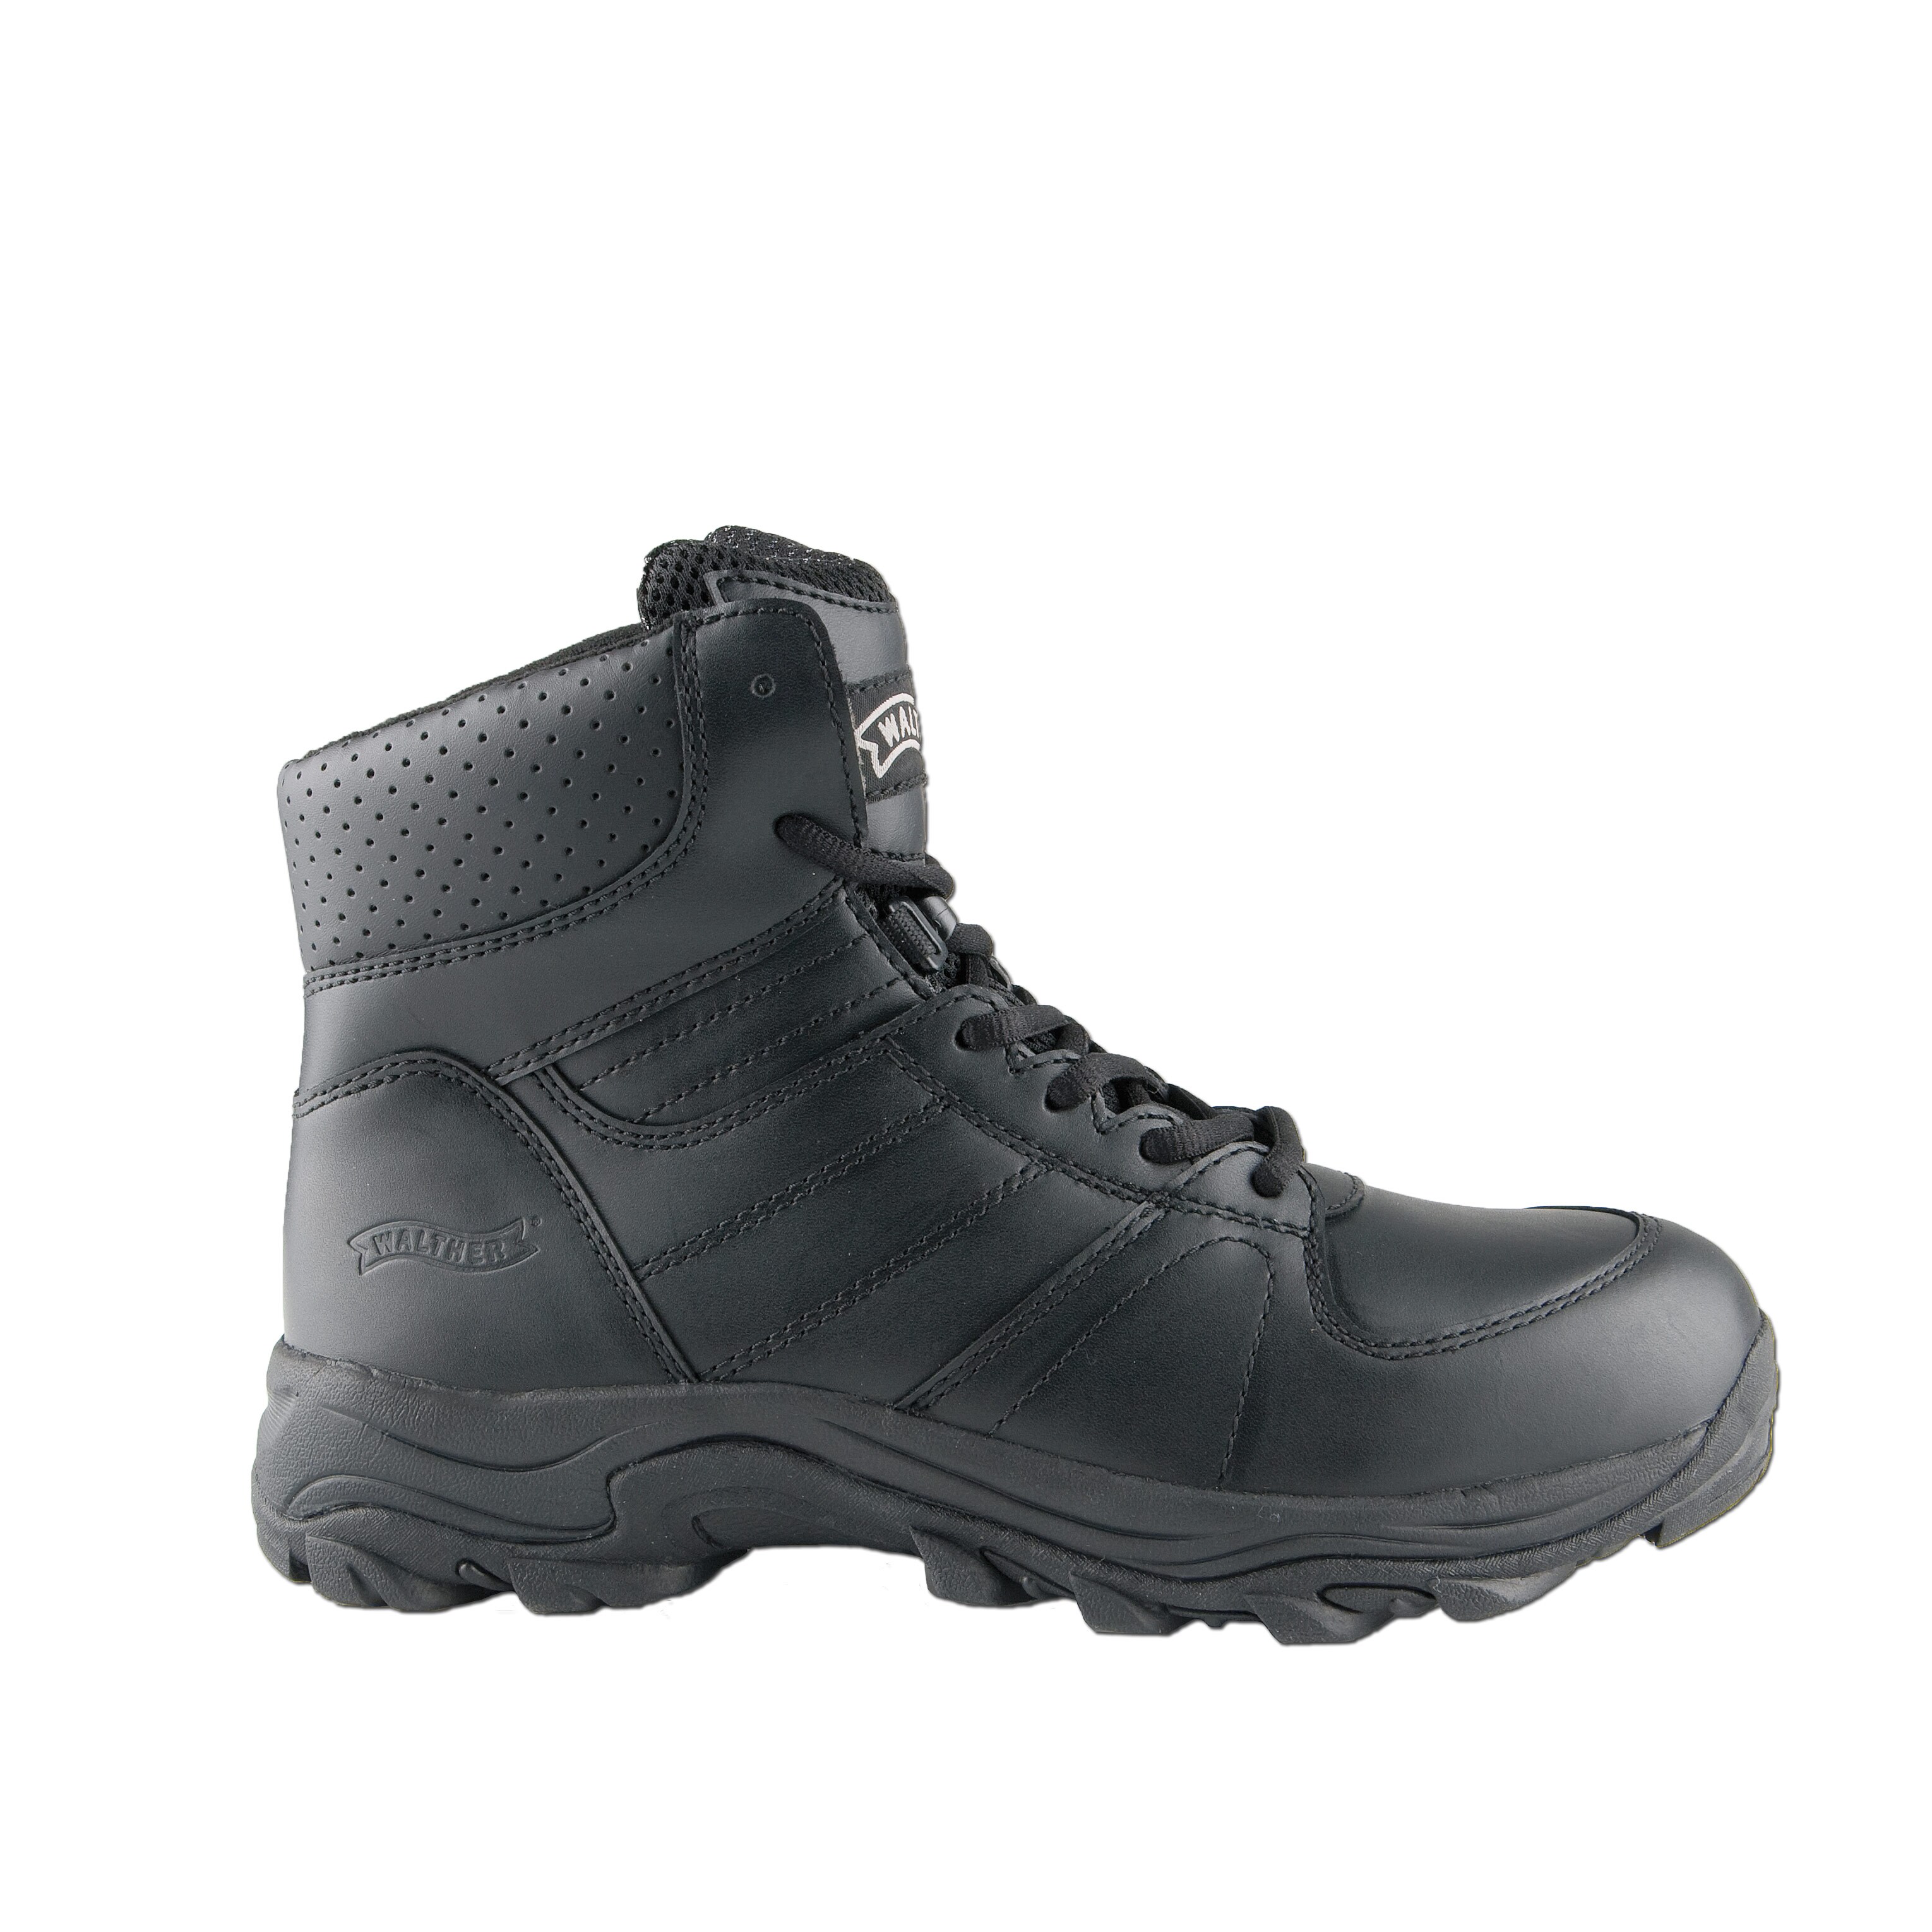 Walther Duty Boots PPQ Mid | Walther Duty Boots PPQ Mid | Combat Boots ...